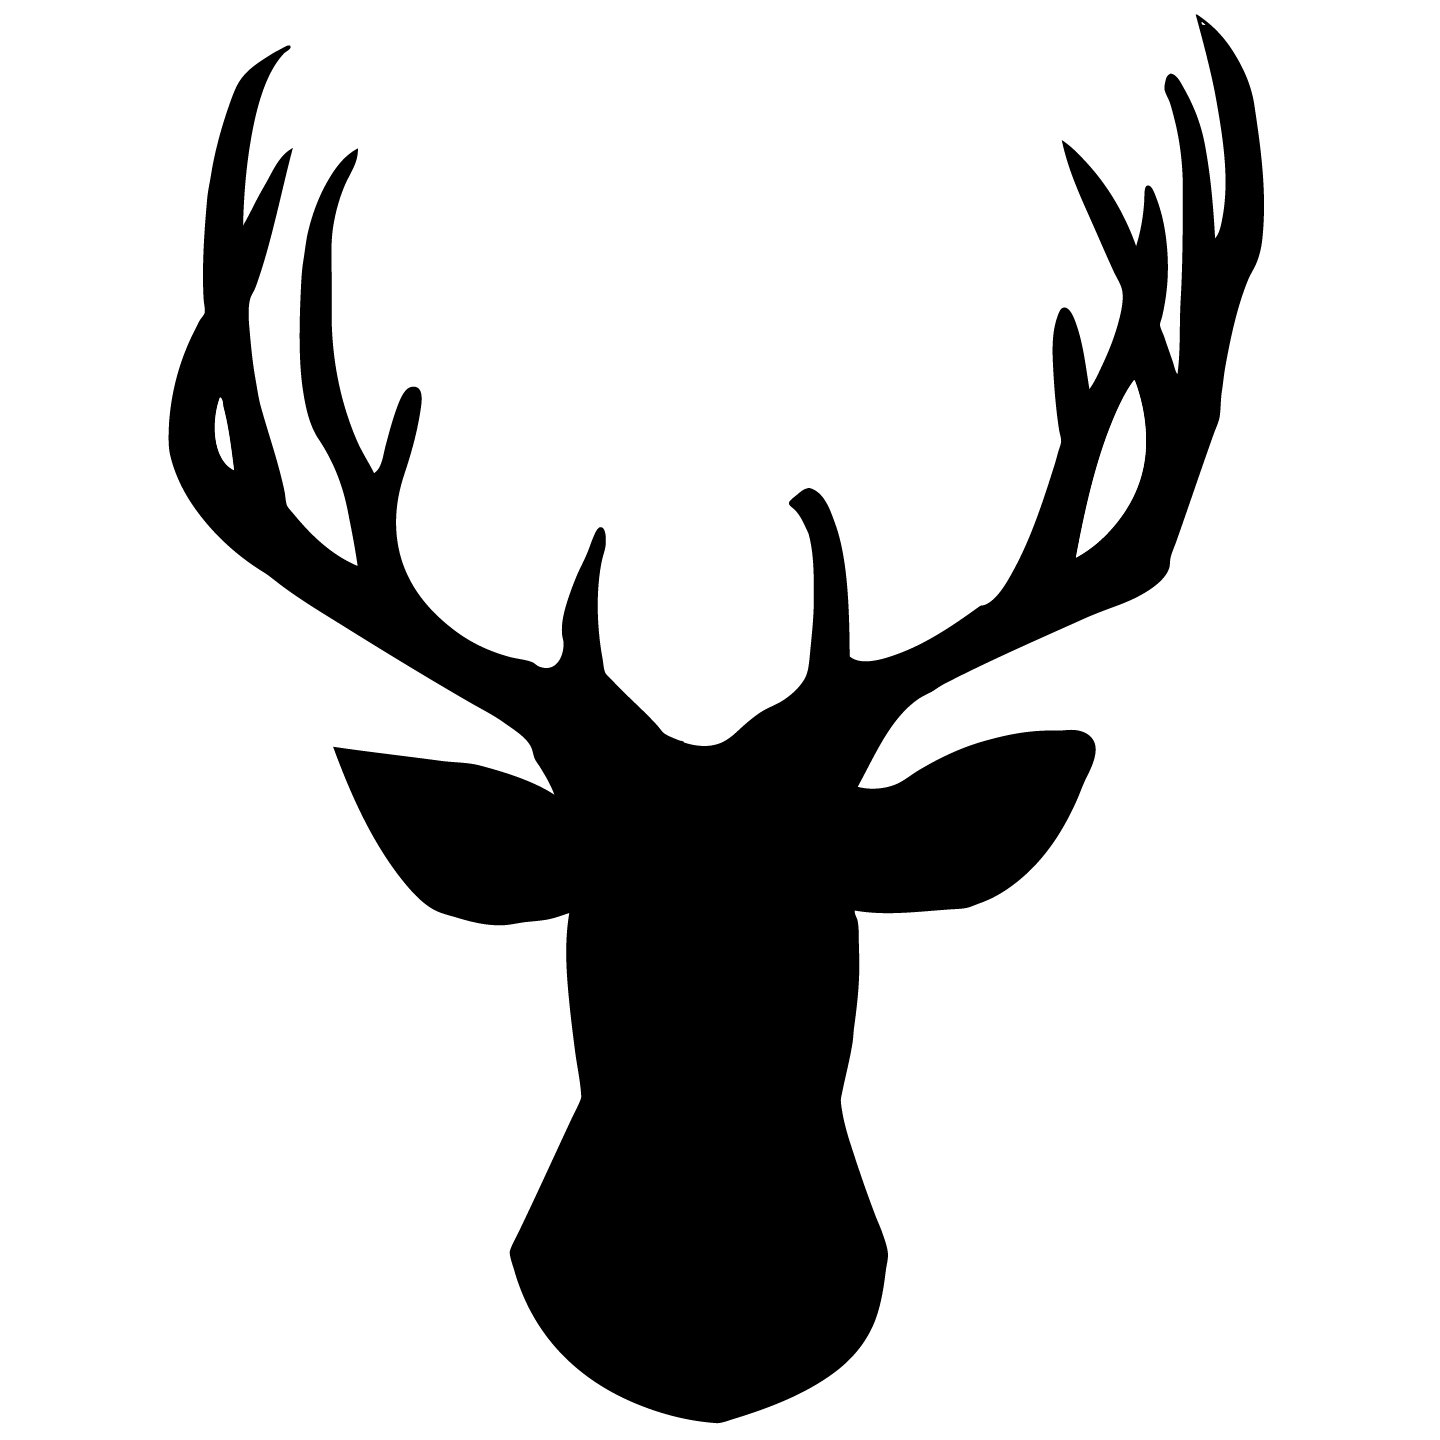 Stag Head Silhouette - ClipArt Best - ClipArt Best